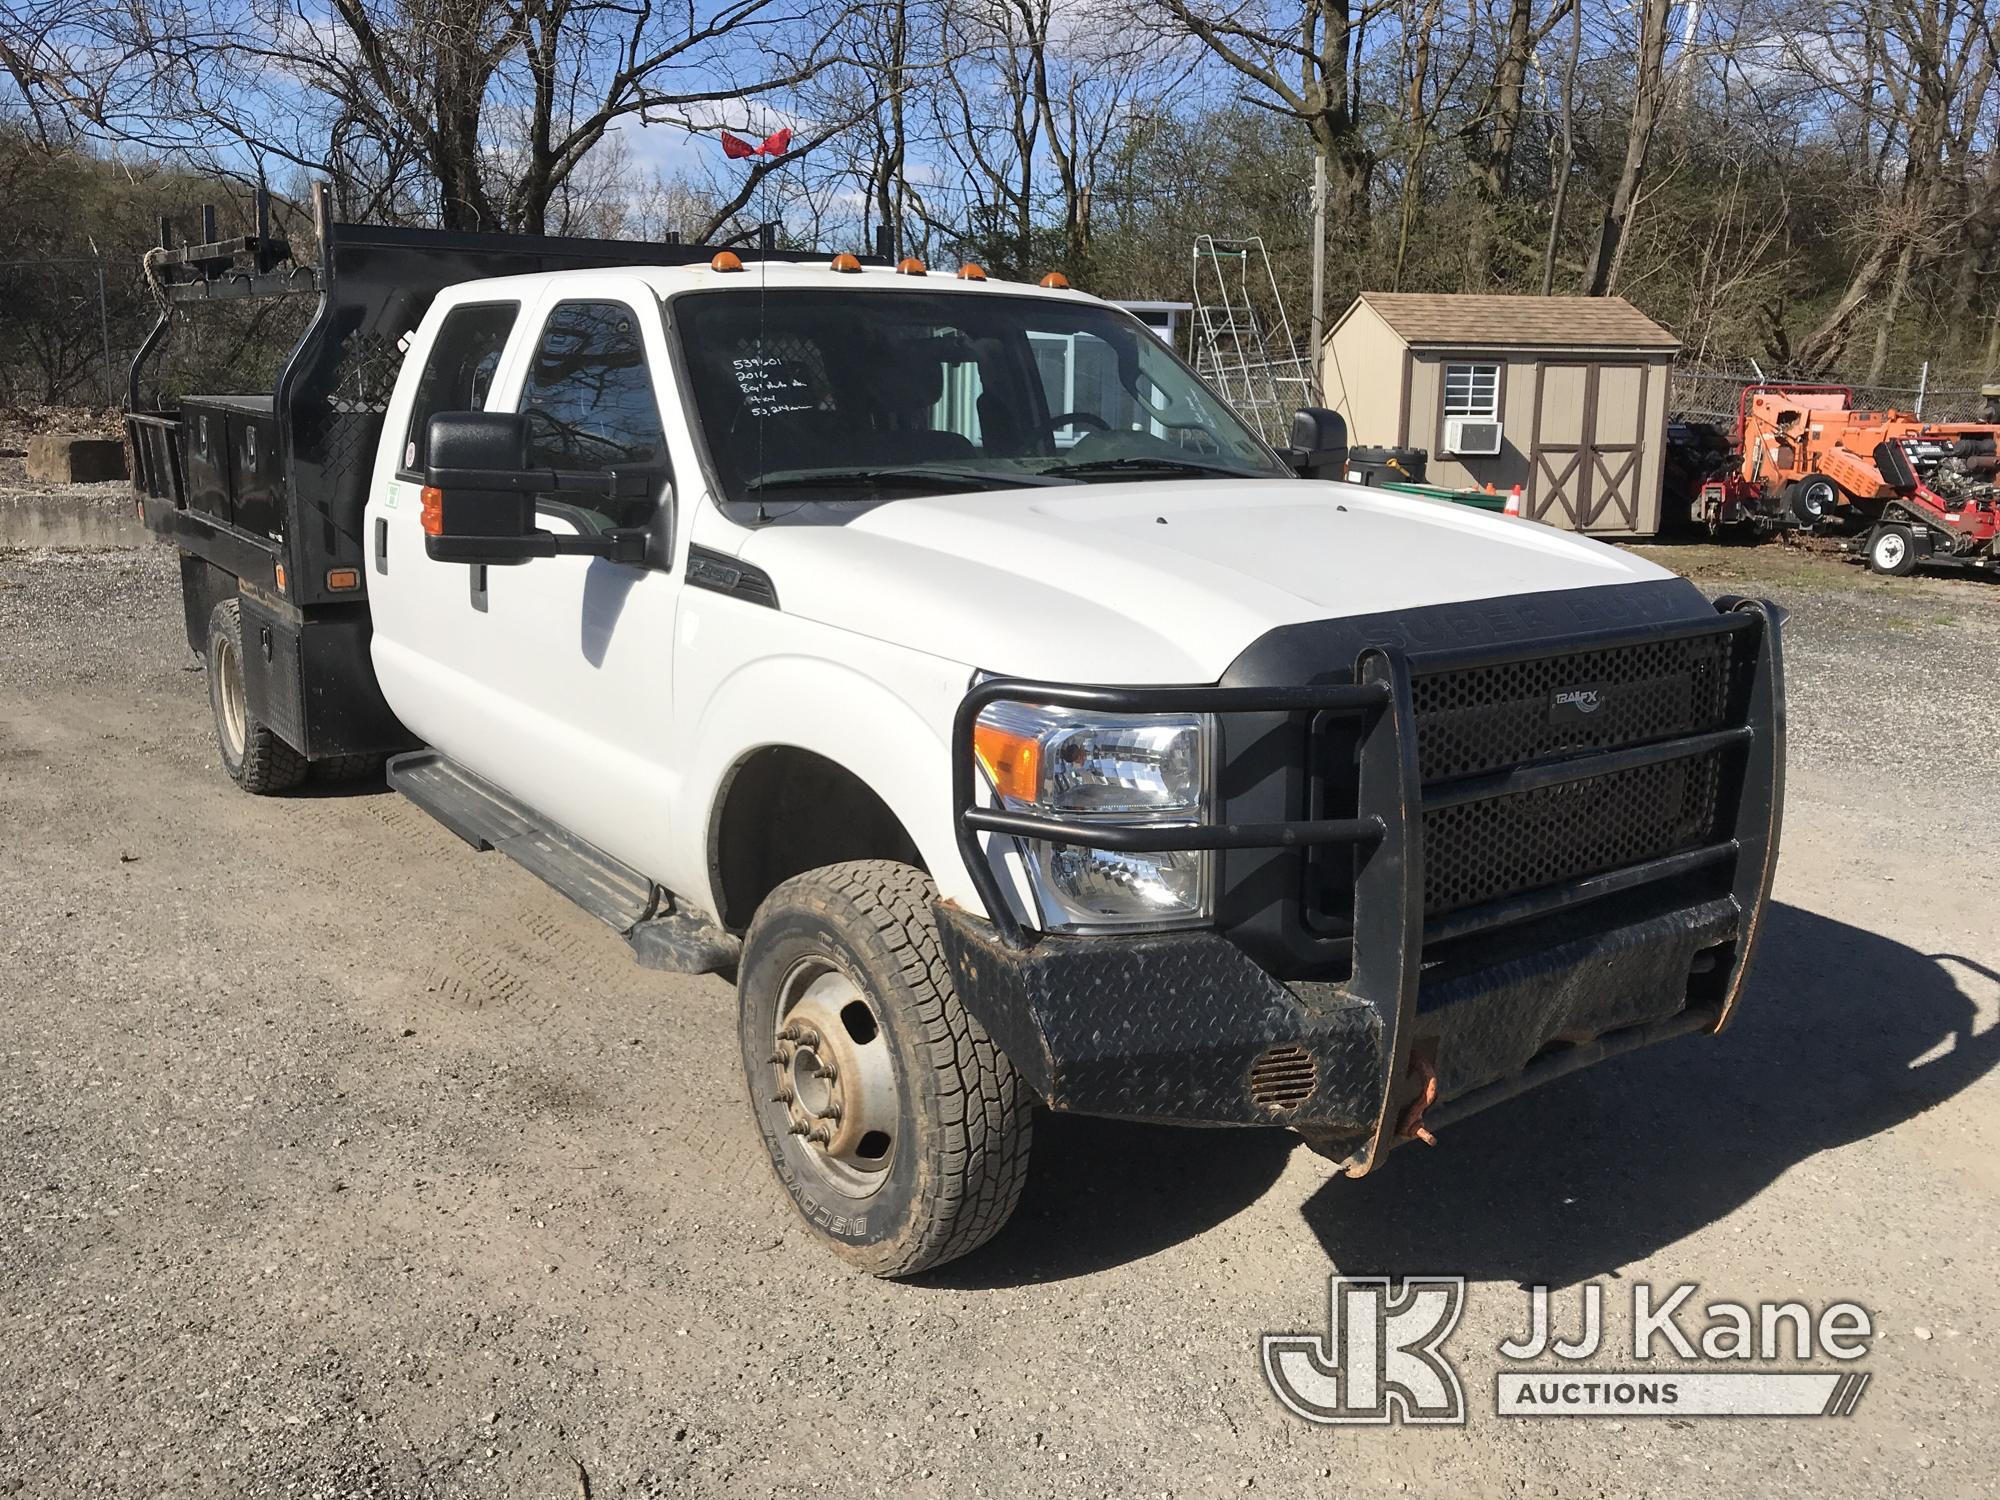 (Plymouth Meeting, PA) 2016 Ford F350 4x4 Crew-Cab Flatbed Truck Runs & Moves, Body & Rust Damage